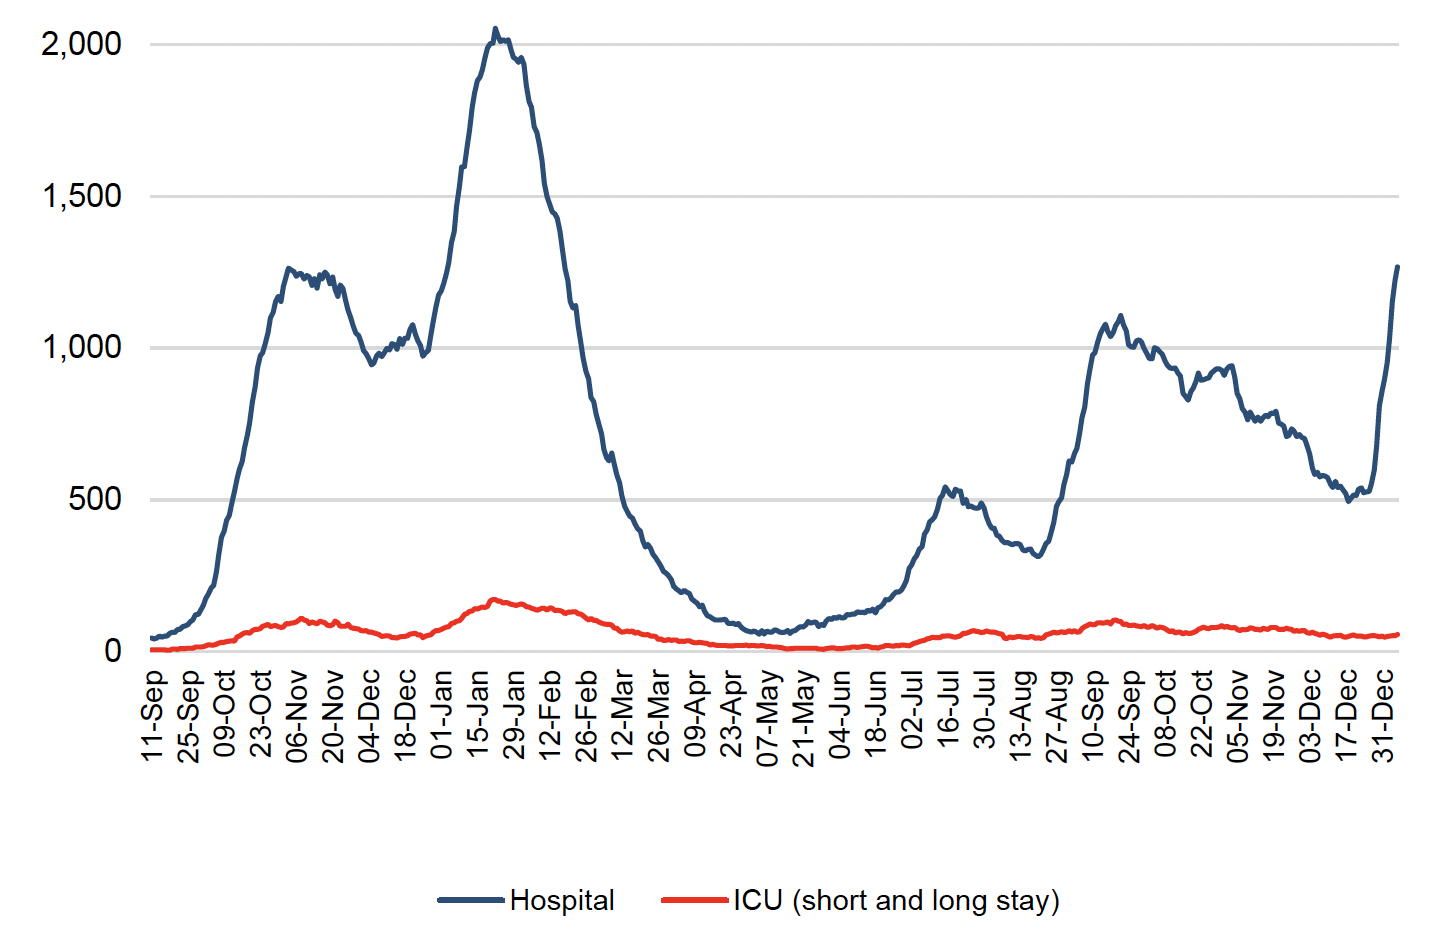 This line chart shows the daily number of patients in hospital and ICU (or combined ICU/ HDU) across Scotland with recently confirmed Covid-19 with a length of stay of 28 days or less since 11 September 2020. Covid-19 patients in hospital (including those in ICU) increased sharply from the end-September 2020 reaching a peak at the beginning of November. Patients in hospital then stabilised before a decrease at the beginning of December. It then started rising sharply from the end of December, reaching a peak of over 2,000 on 22 January 2021. The number of patients in hospital decreased sharply since then before plateauing throughout May and June. It then rose to over 500 patients in hospital in July and decreased by the end of August. It then rose again reaching a peak of over a 1,000 patients in hospital by mid-September 2021. While the number of patients in hospital has been fluctuating since mid-September, it was generally declining since early October to end December, but has sharply risen since then.  
A line for patients in ICU for both short and long stay follows a similar pattern with an increase seen for short stay patients from end-September 2020. It then reached a peak of over 100 patients in ICU with length of stay 28 days or less at the beginning of November and then decreased to just below 50 patients in ICU in December 2020. Then a sharper increase is seen in patients in ICU for short and long stay by the end of January 2021 before it started to decrease. The number of patients in ICU remained low throughout late spring and early summer before a slight increase in July 2021. It then decreased a little before a further increase by mid-September. Covid-19 ICU occupancy has fluctuated and the trend has decreased slightly overall since mid-September. 
